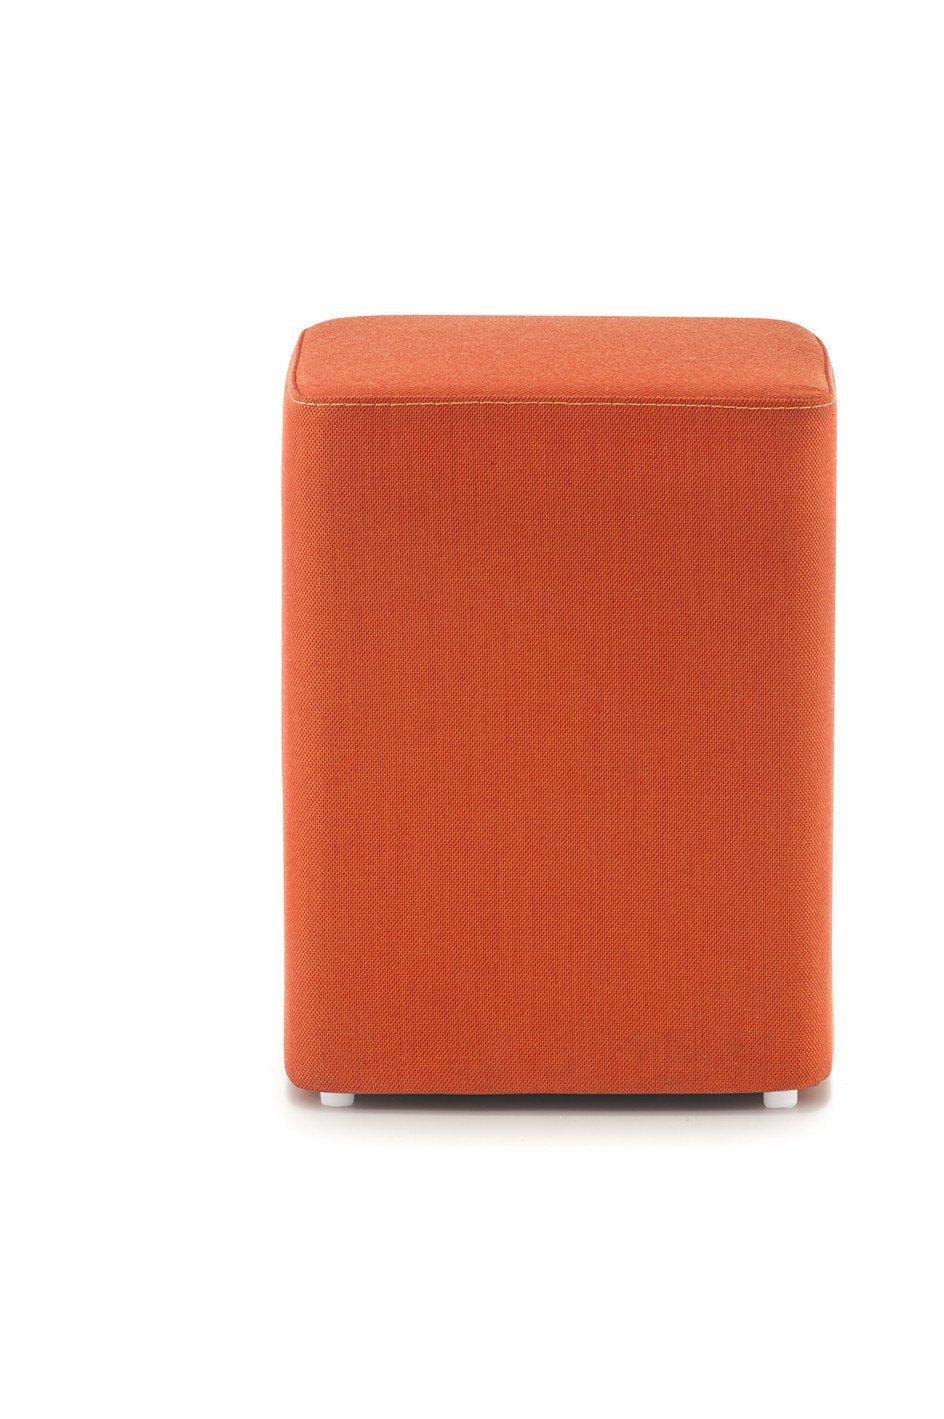 Wow Small Cube Stool-Pedrali-Contract Furniture Store